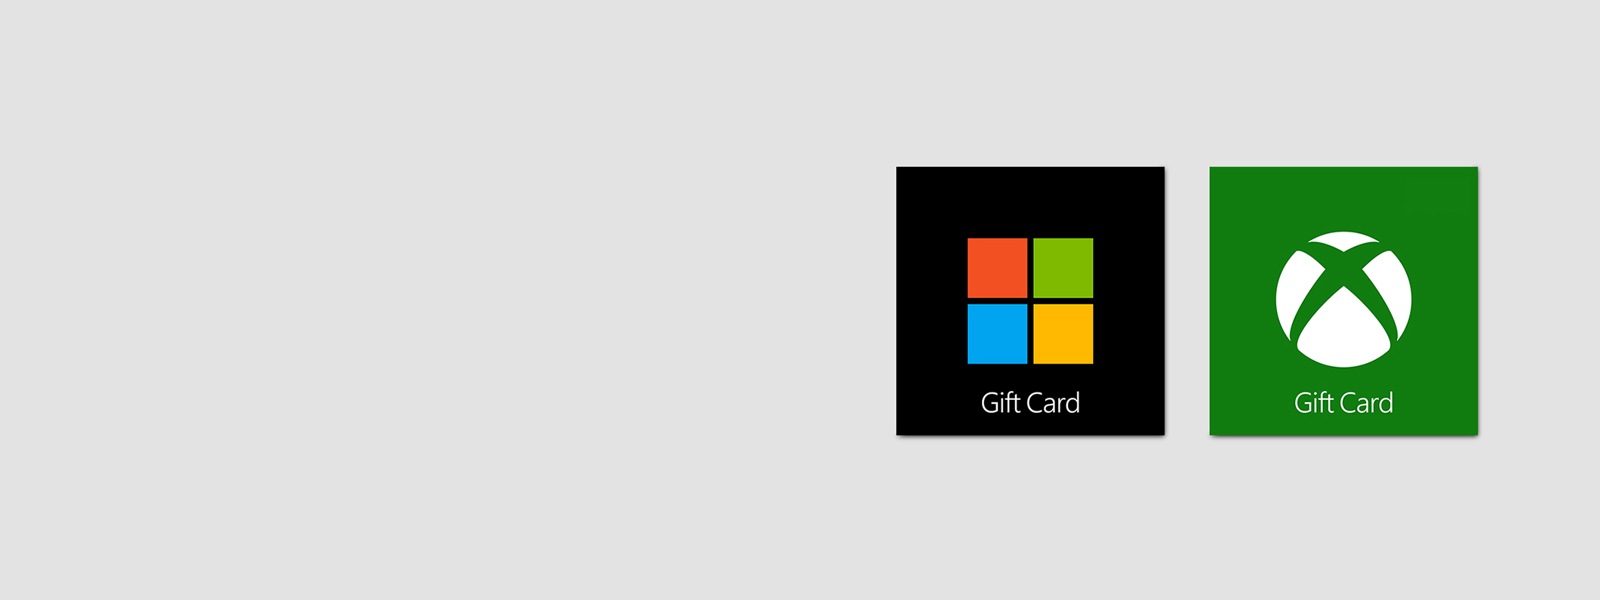 Xbox Gaming Gift Cards & More - Microsoft Store